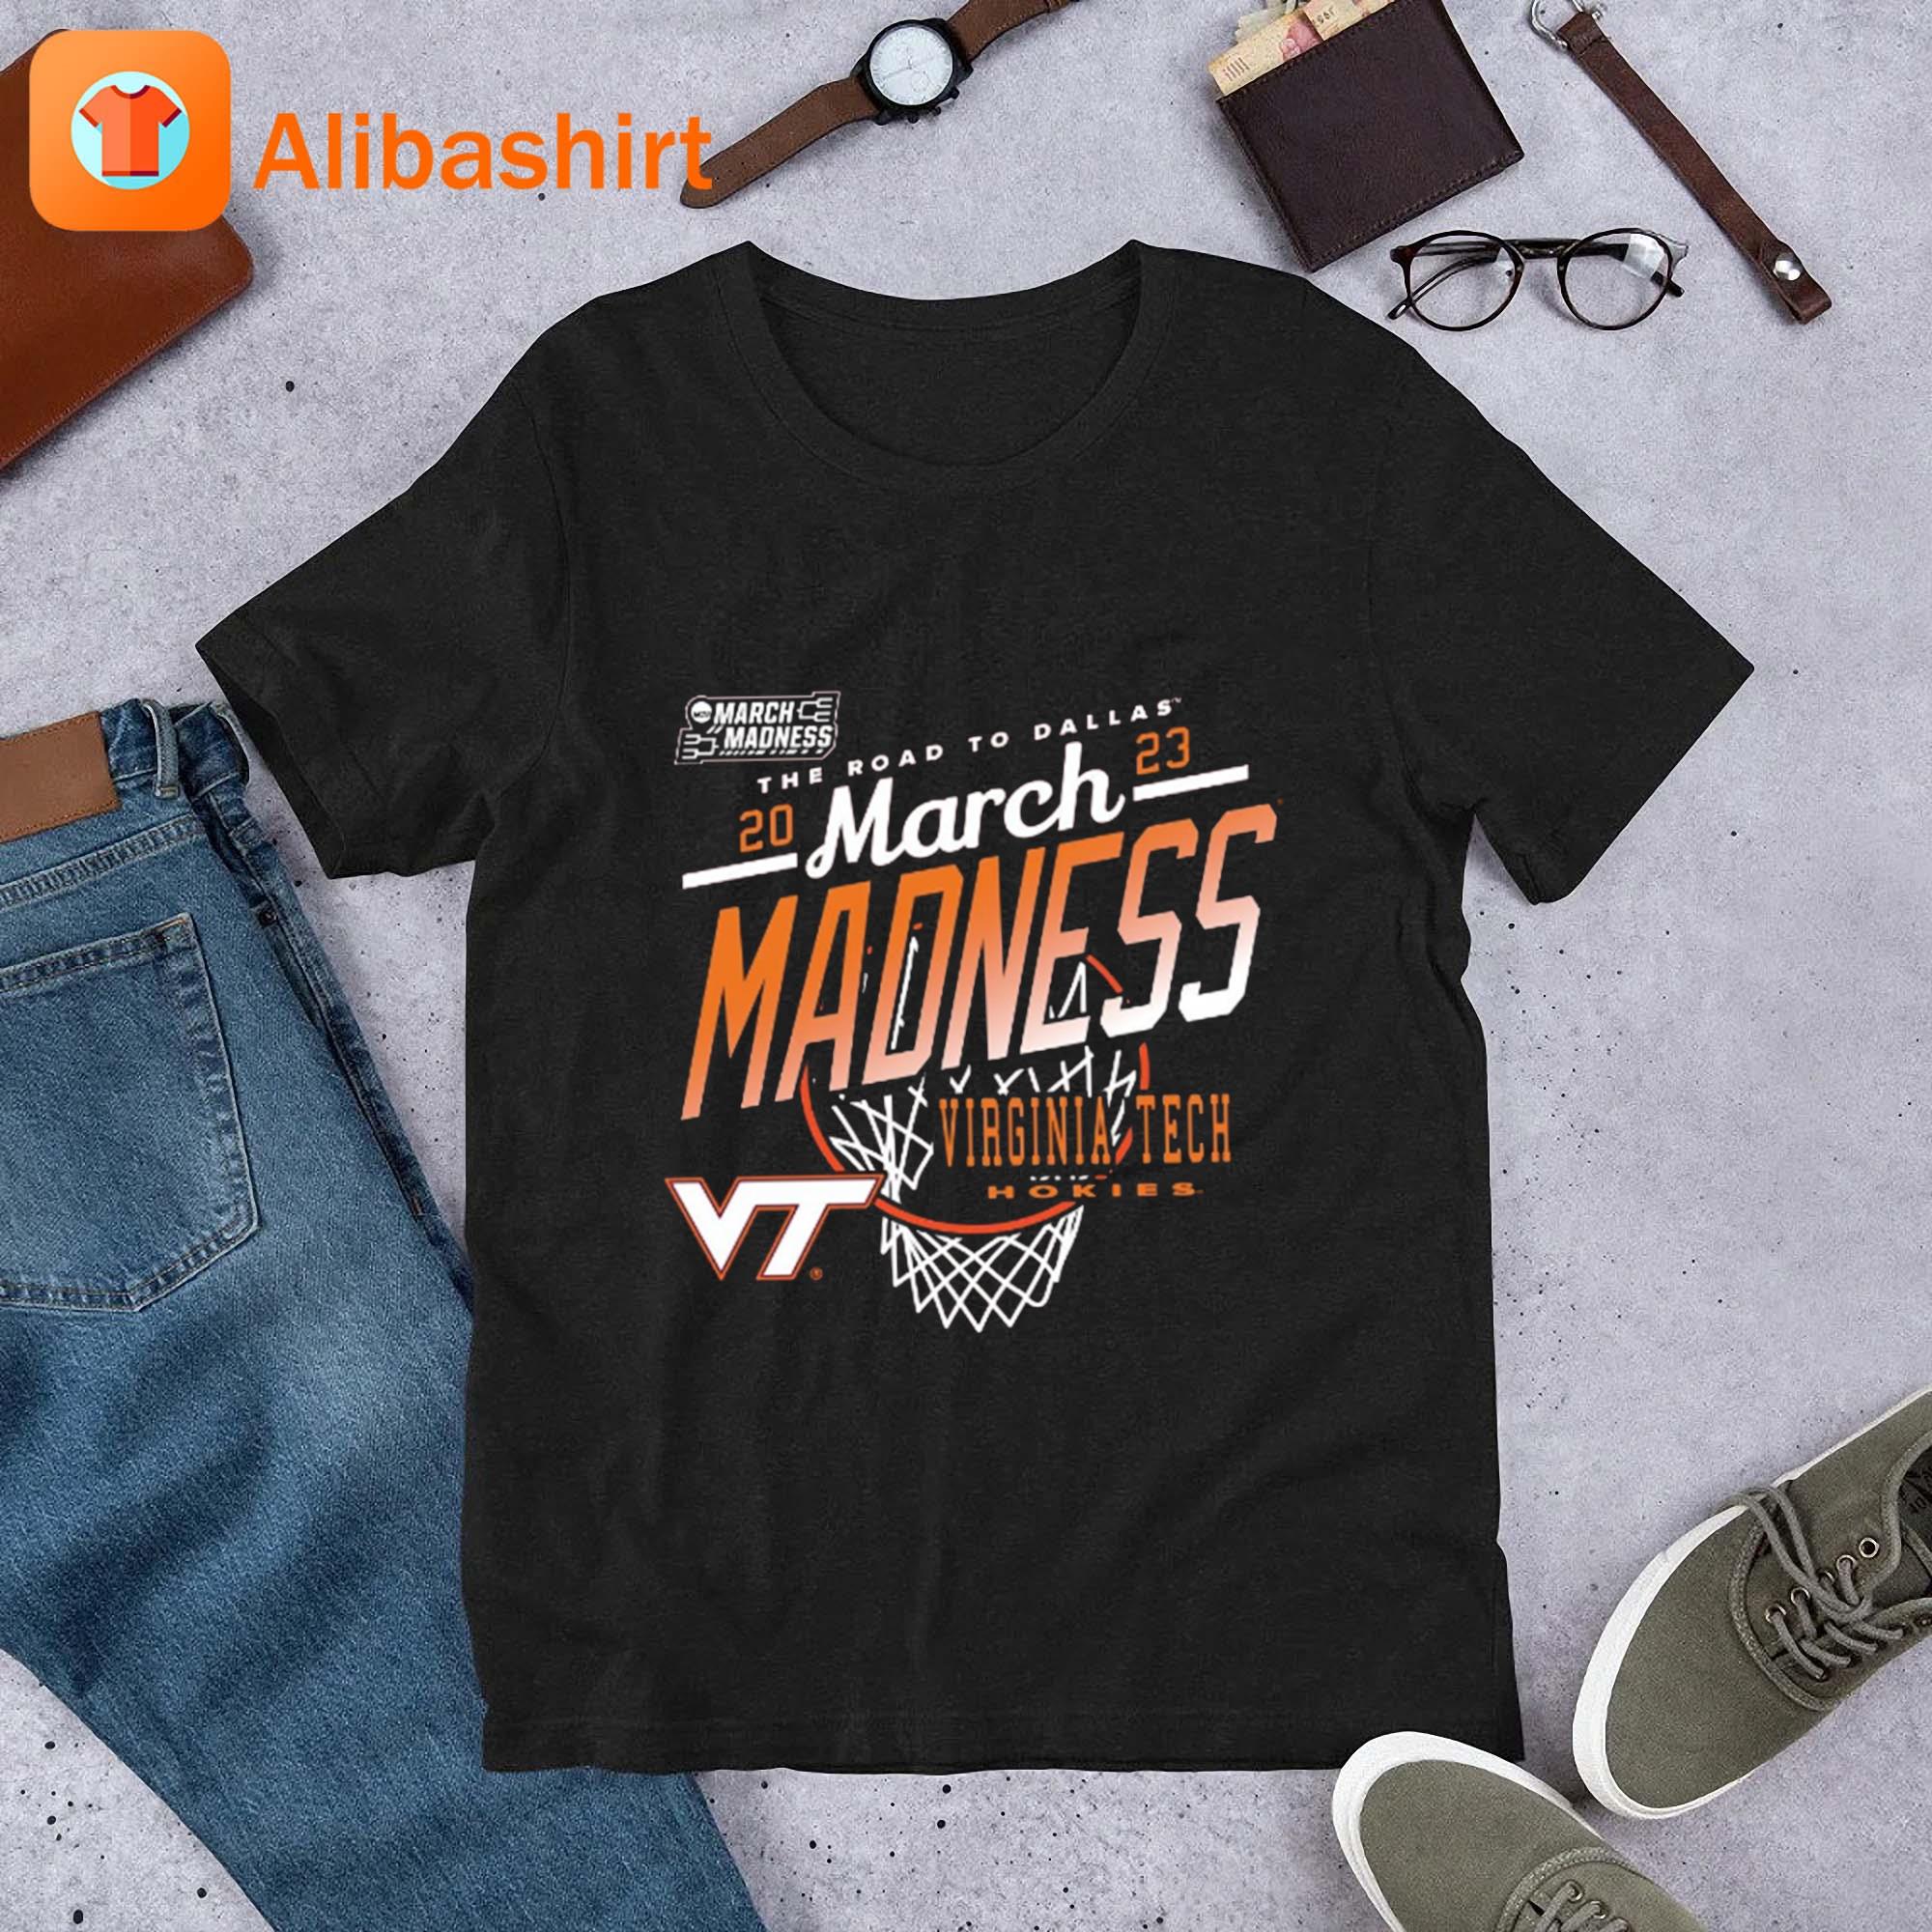 Virginia Tech Hokies 2023 The Road To Dallas March Madness shirt